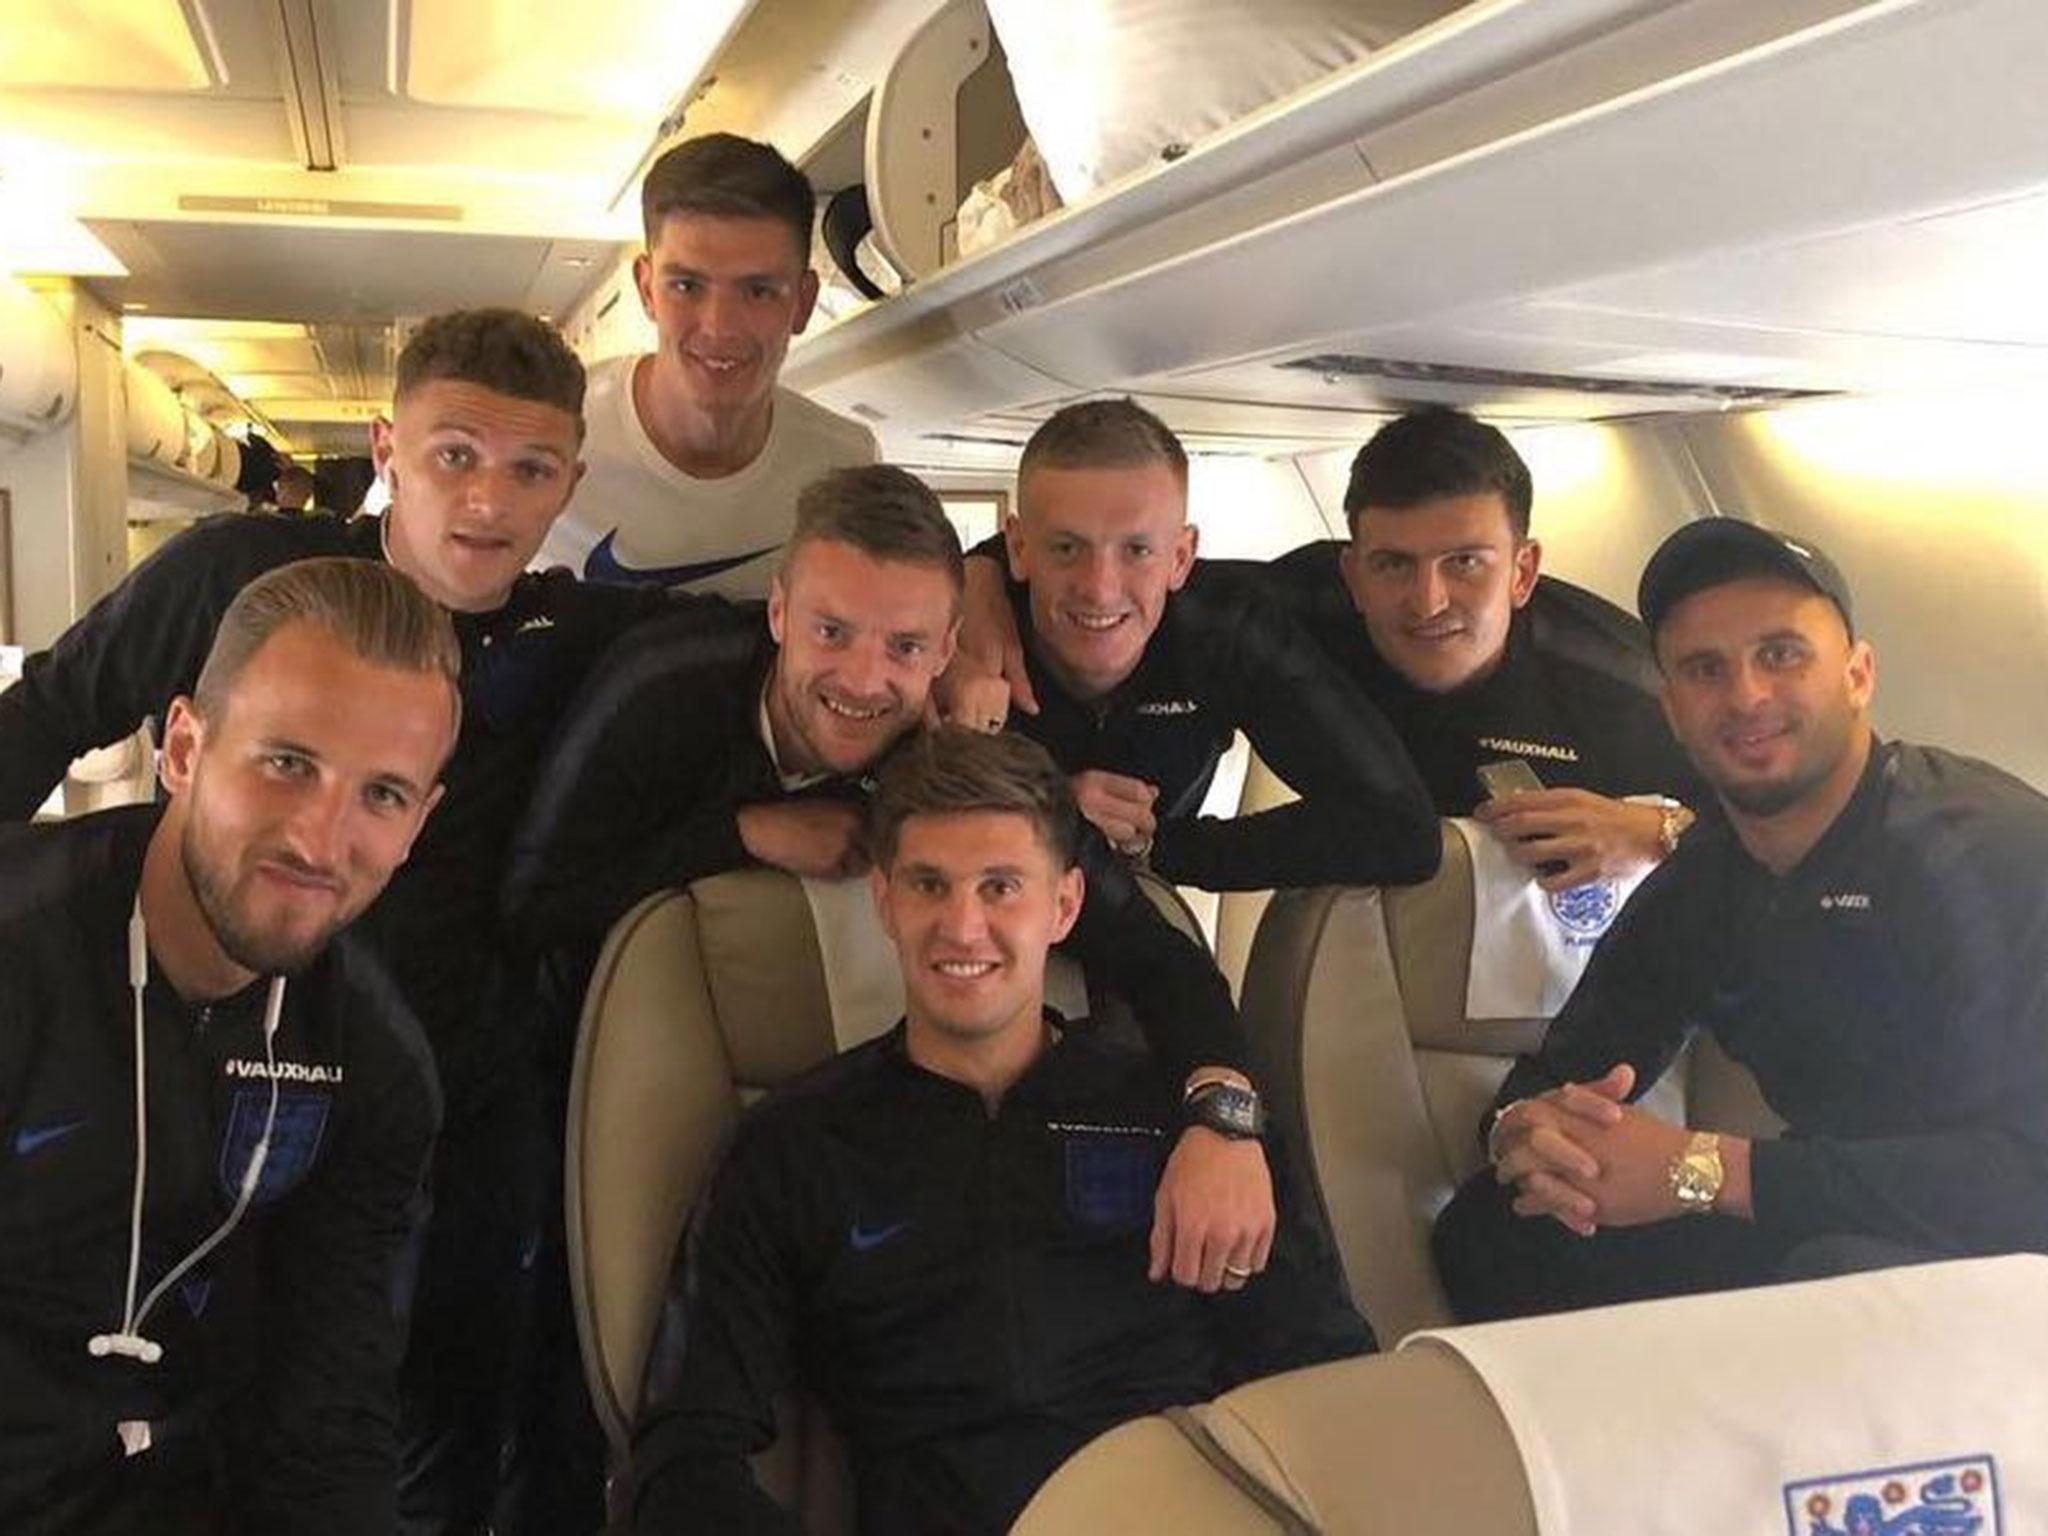 World Cup 2018 - live updates: Latest news and highlights as England fly out to Russia